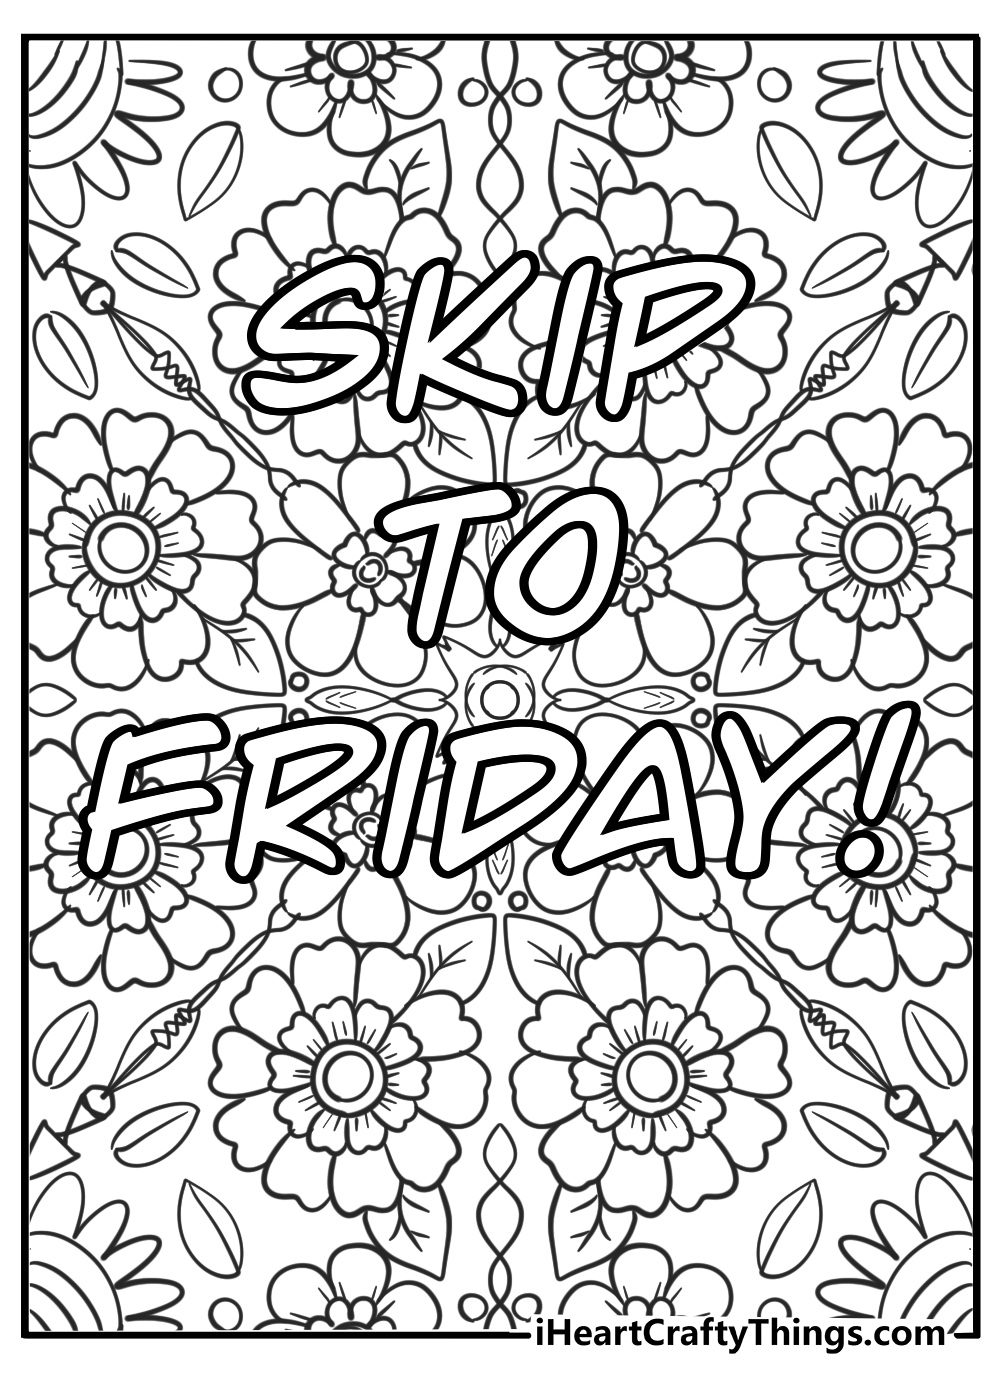 Funny adult coloring pages